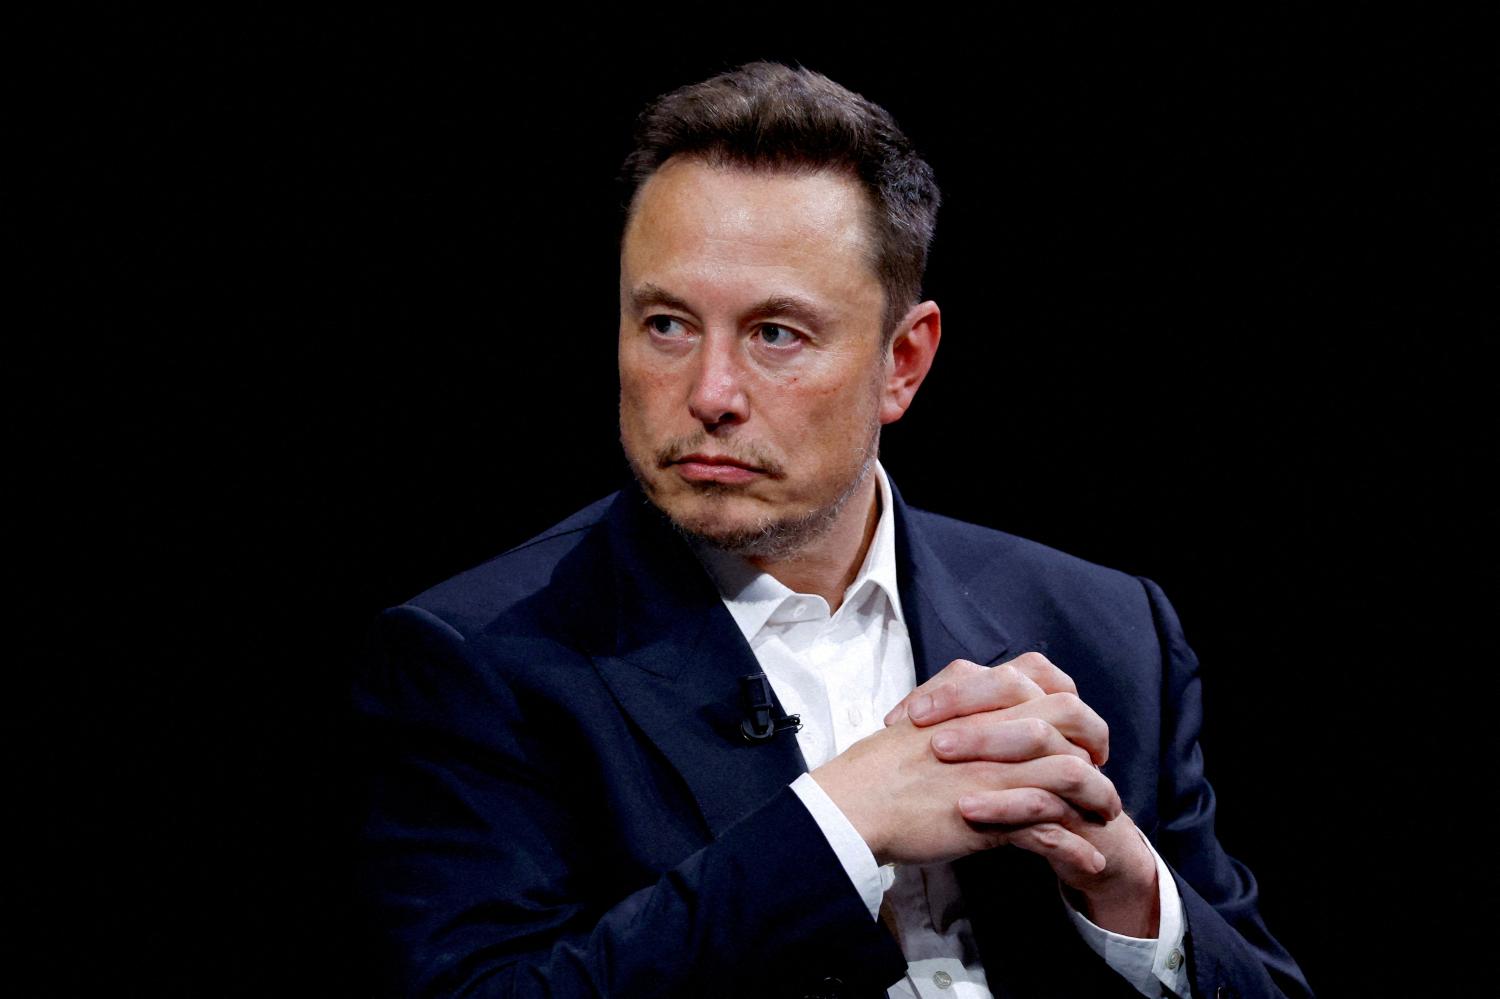 Elon Musk, Chief Executive Officer of SpaceX and Tesla and owner of X, formerly known as Twitter, attends the Viva Technology conference dedicated to innovation and startups at the Porte de Versailles exhibition centre in Paris, France, June 16, 2023.